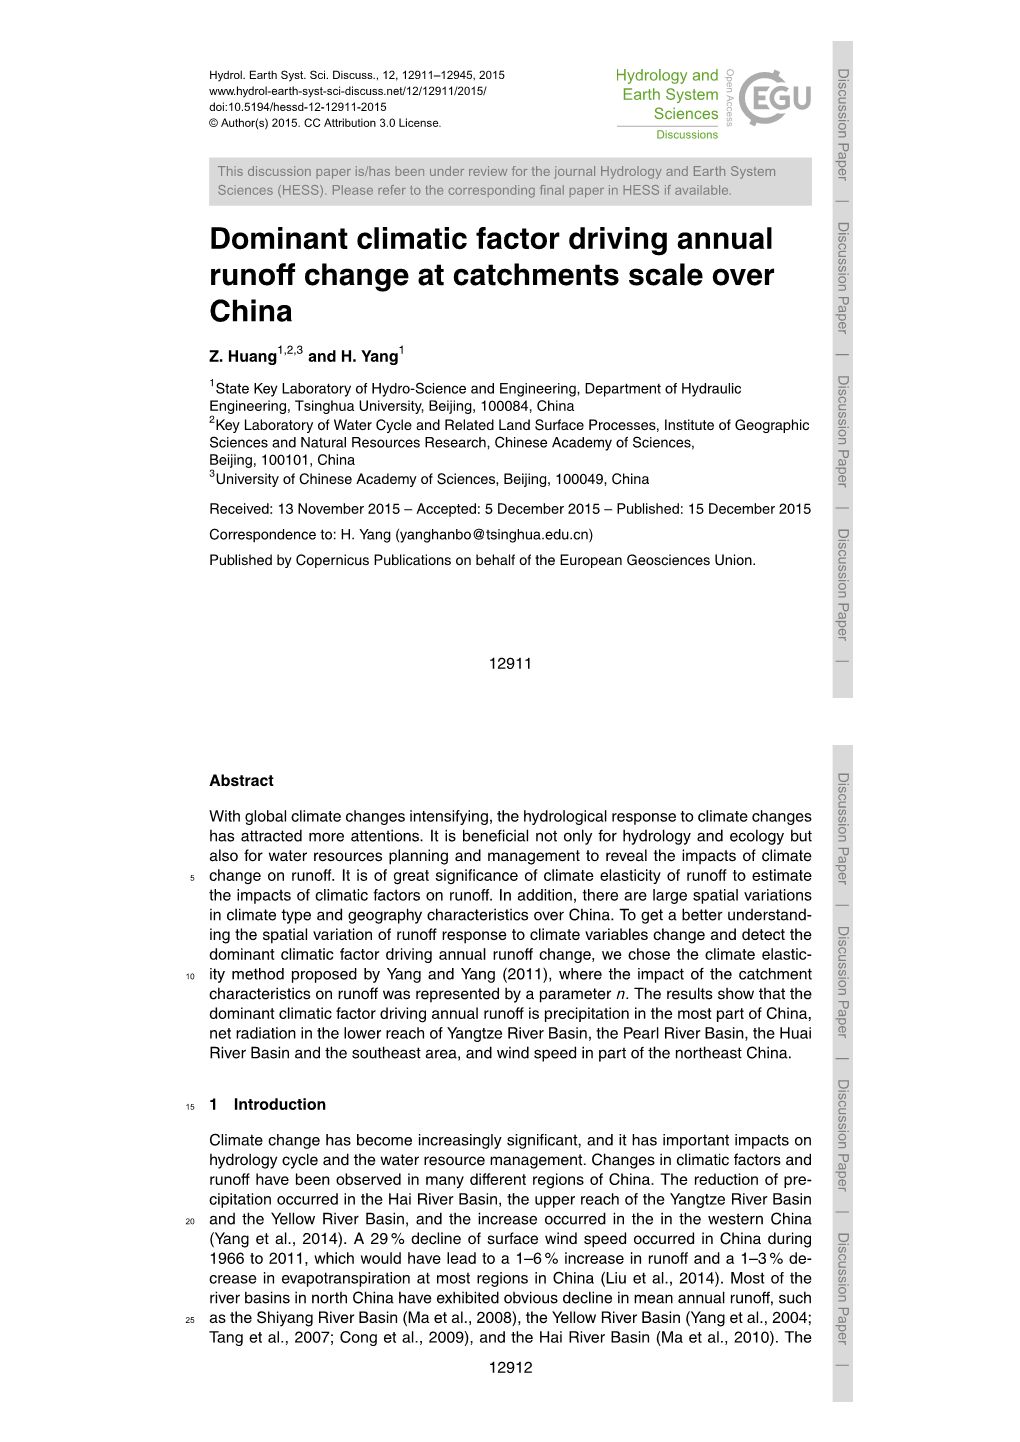 Dominant Climatic Factor Driving Annual Runoff Change at Catchments Scale Over China